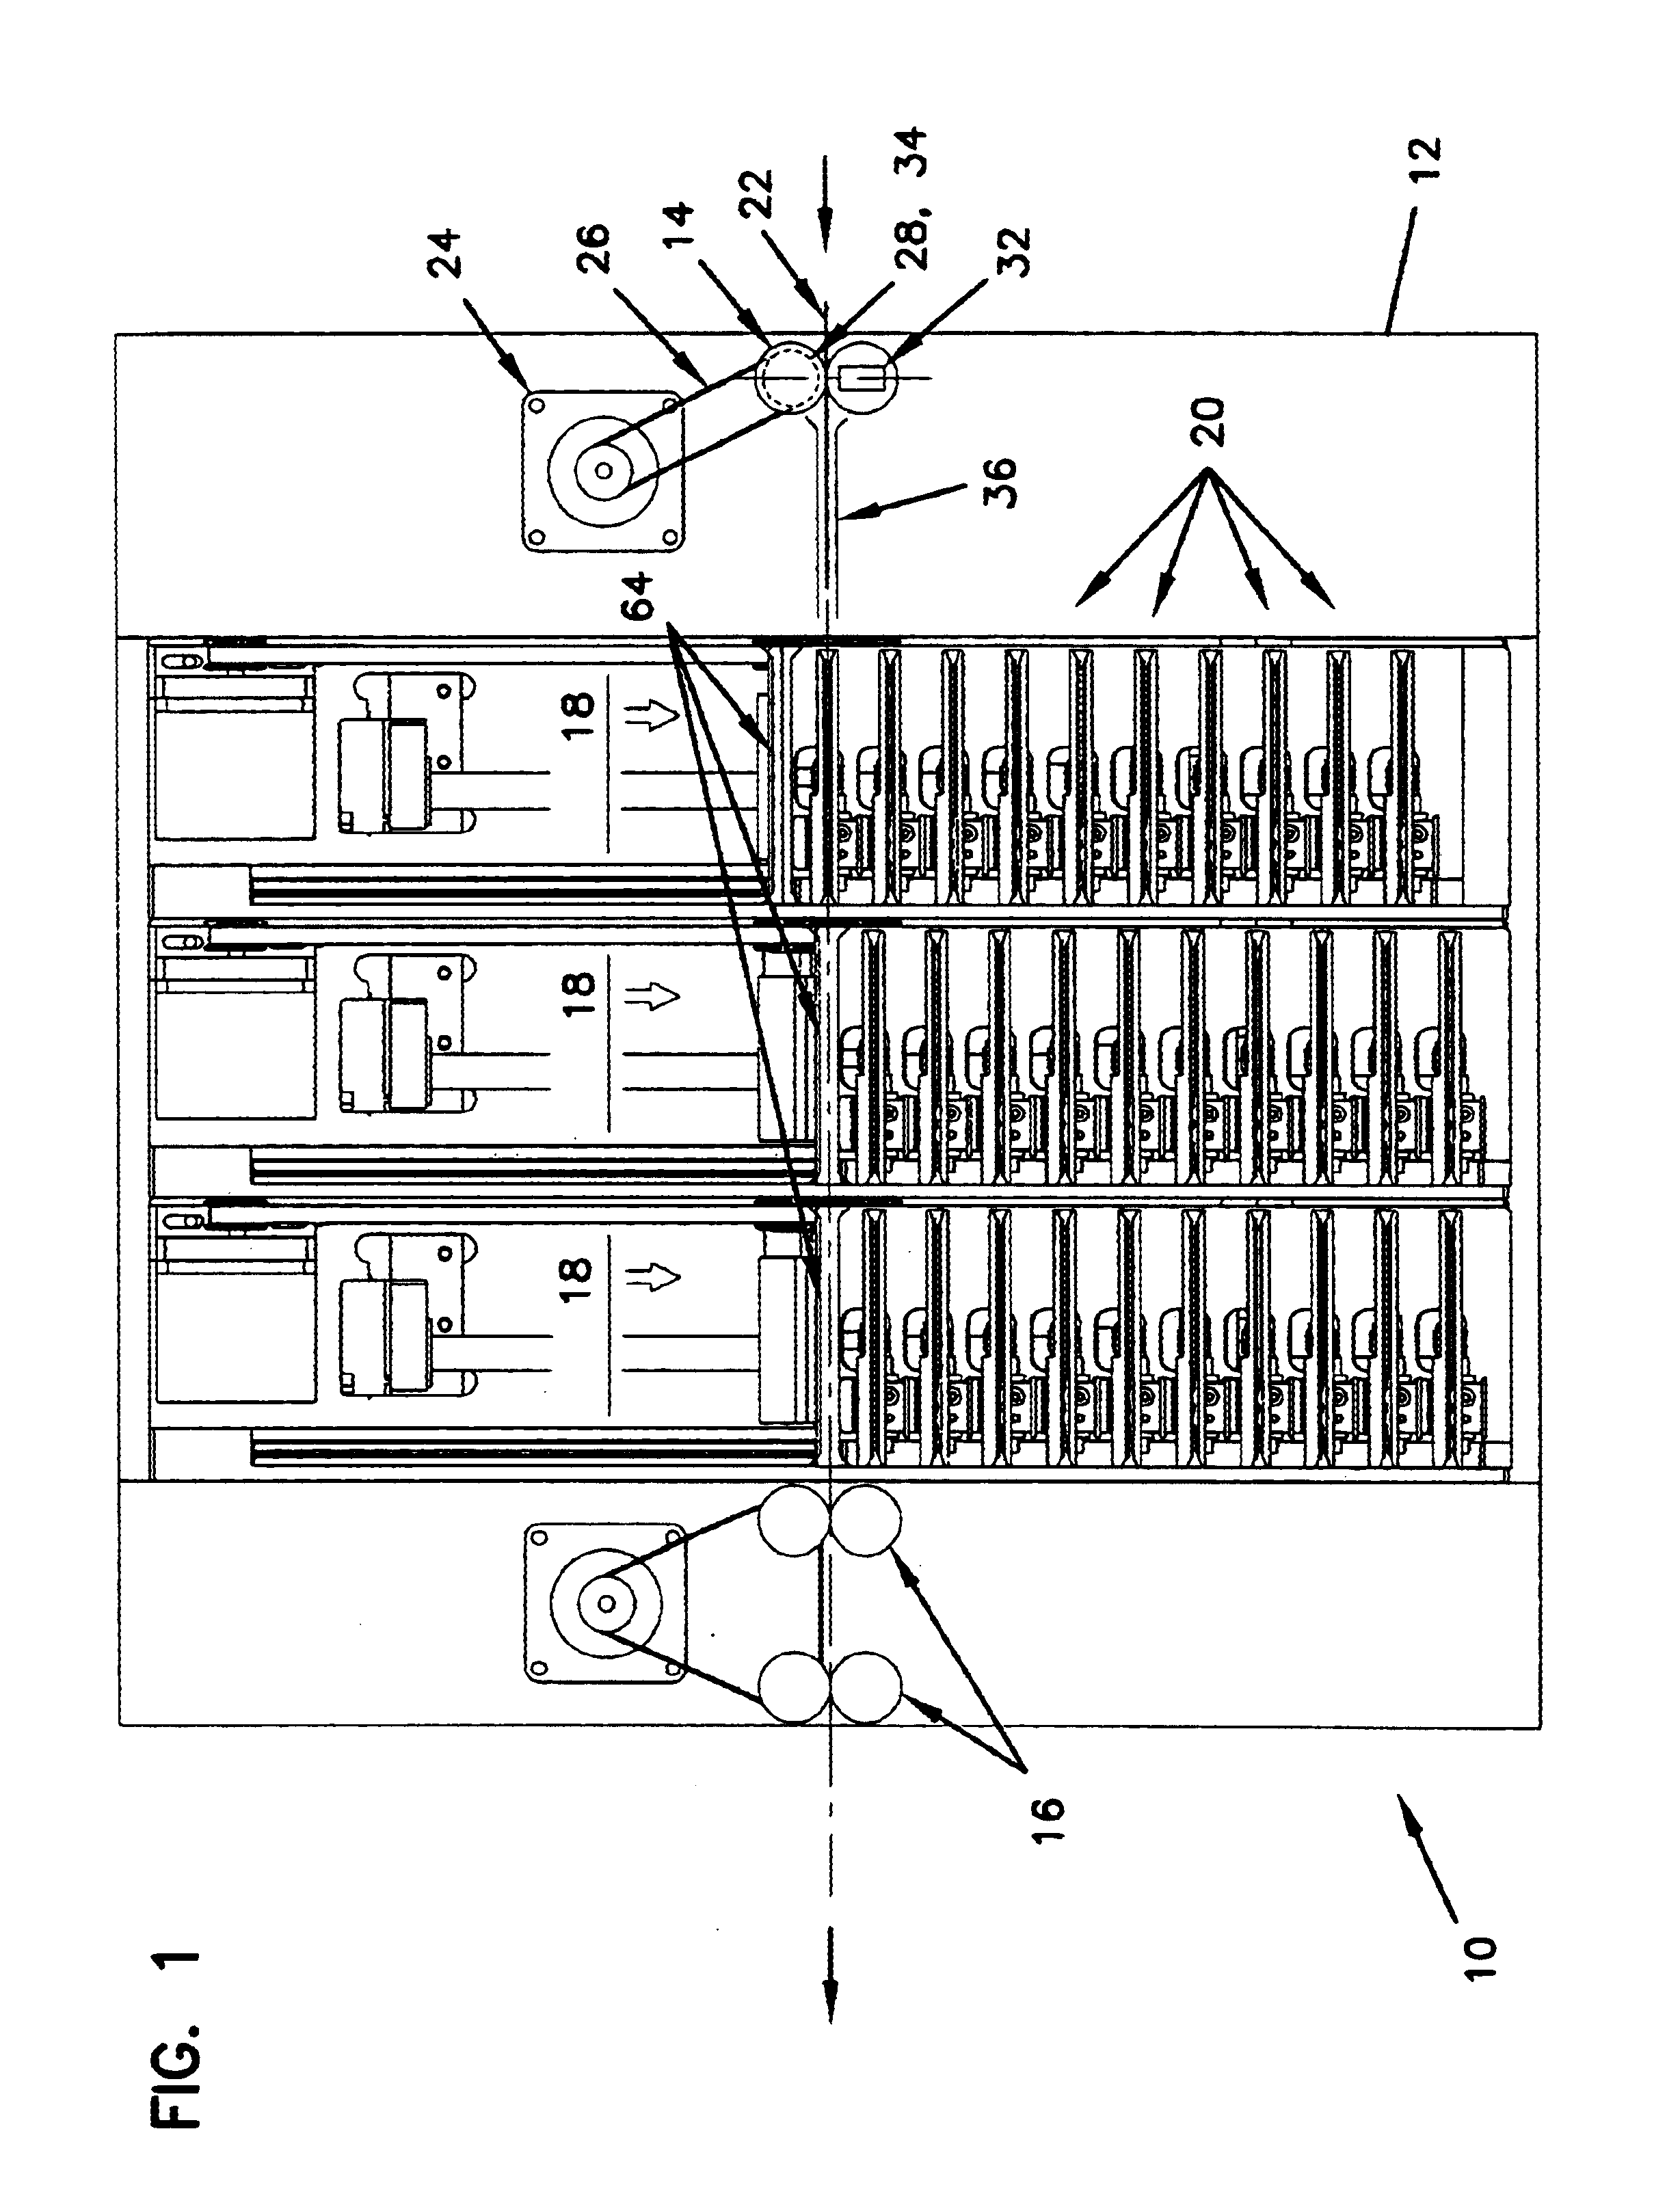 Integrated circuit card programming modules, systems and methods